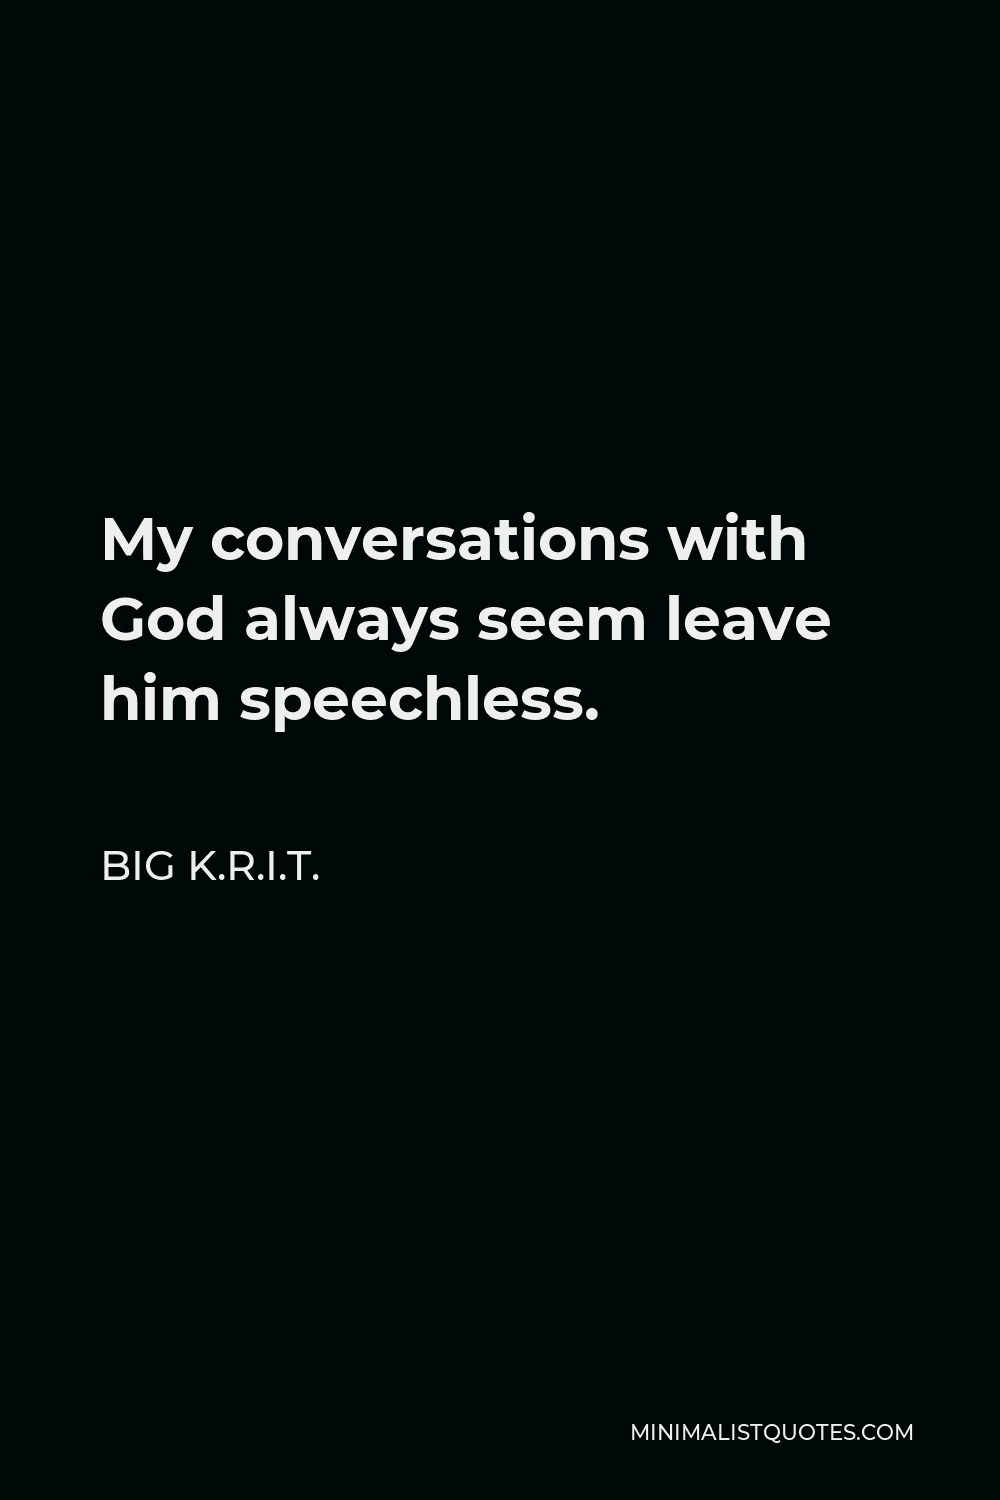 Big K.R.I.T. Quote - My conversations with God always seem leave him speechless.